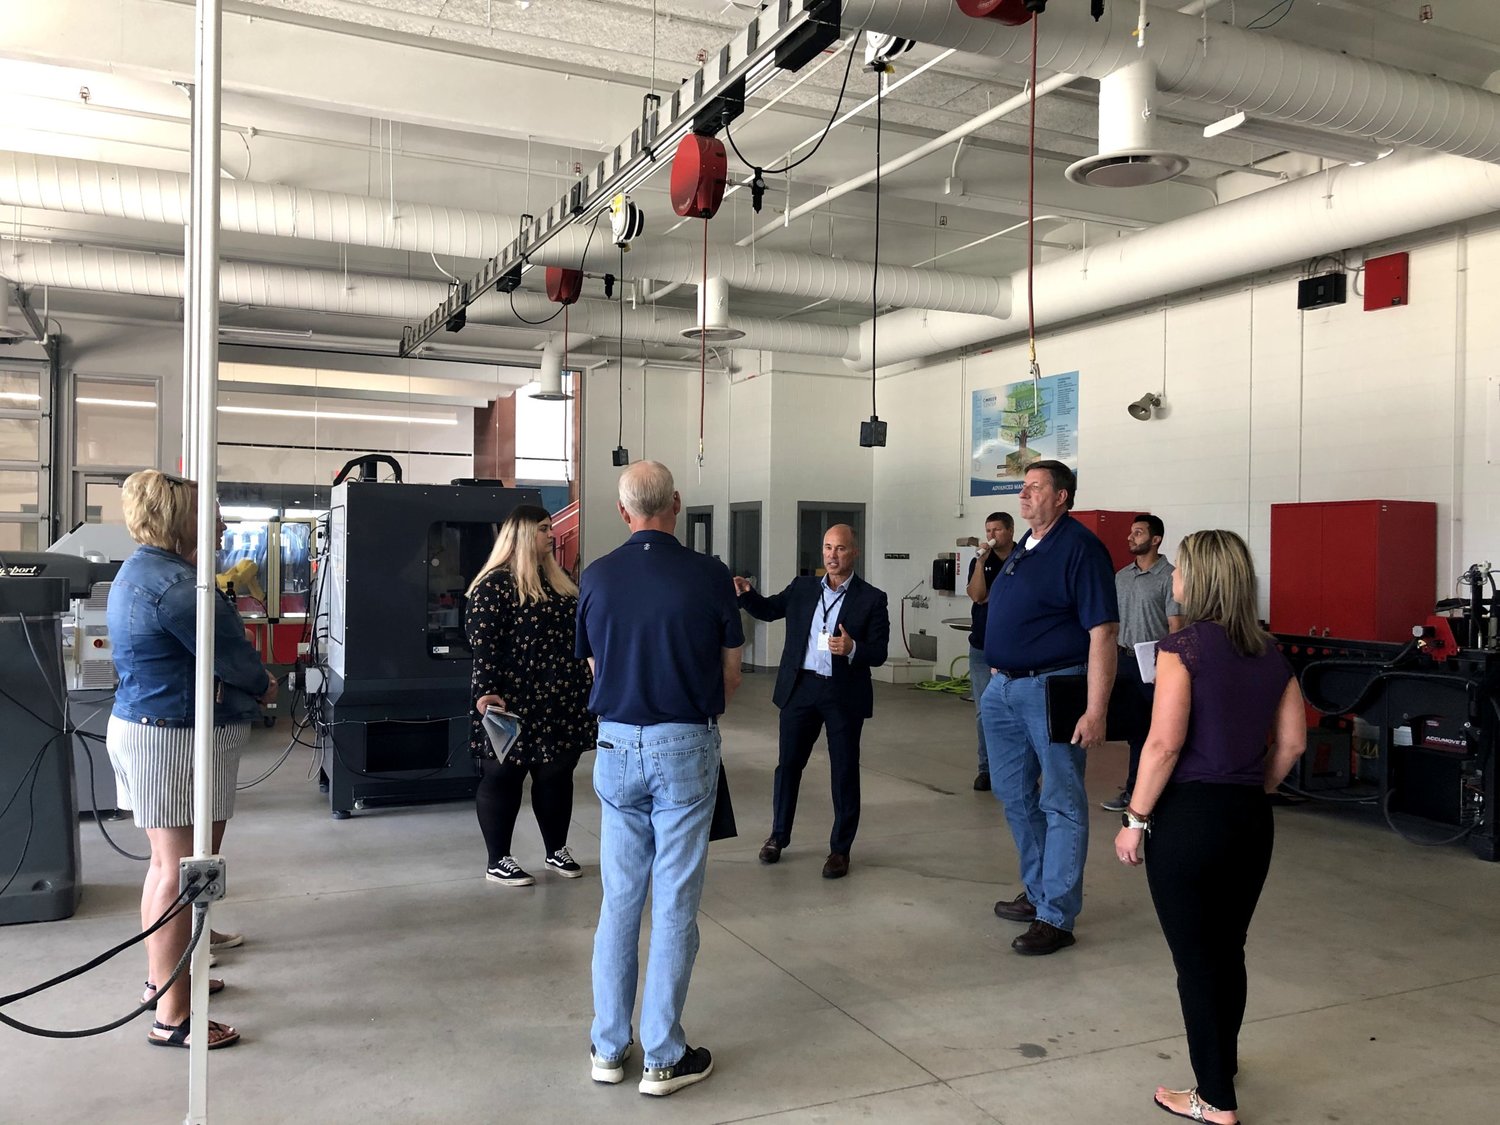 Officials with the Lee County Economic Development Group toured the Waterloo Education Center Tuesday to get a look at programming and facilities of a working center. Photo by Elizabeth Meyer for the Pen City Current